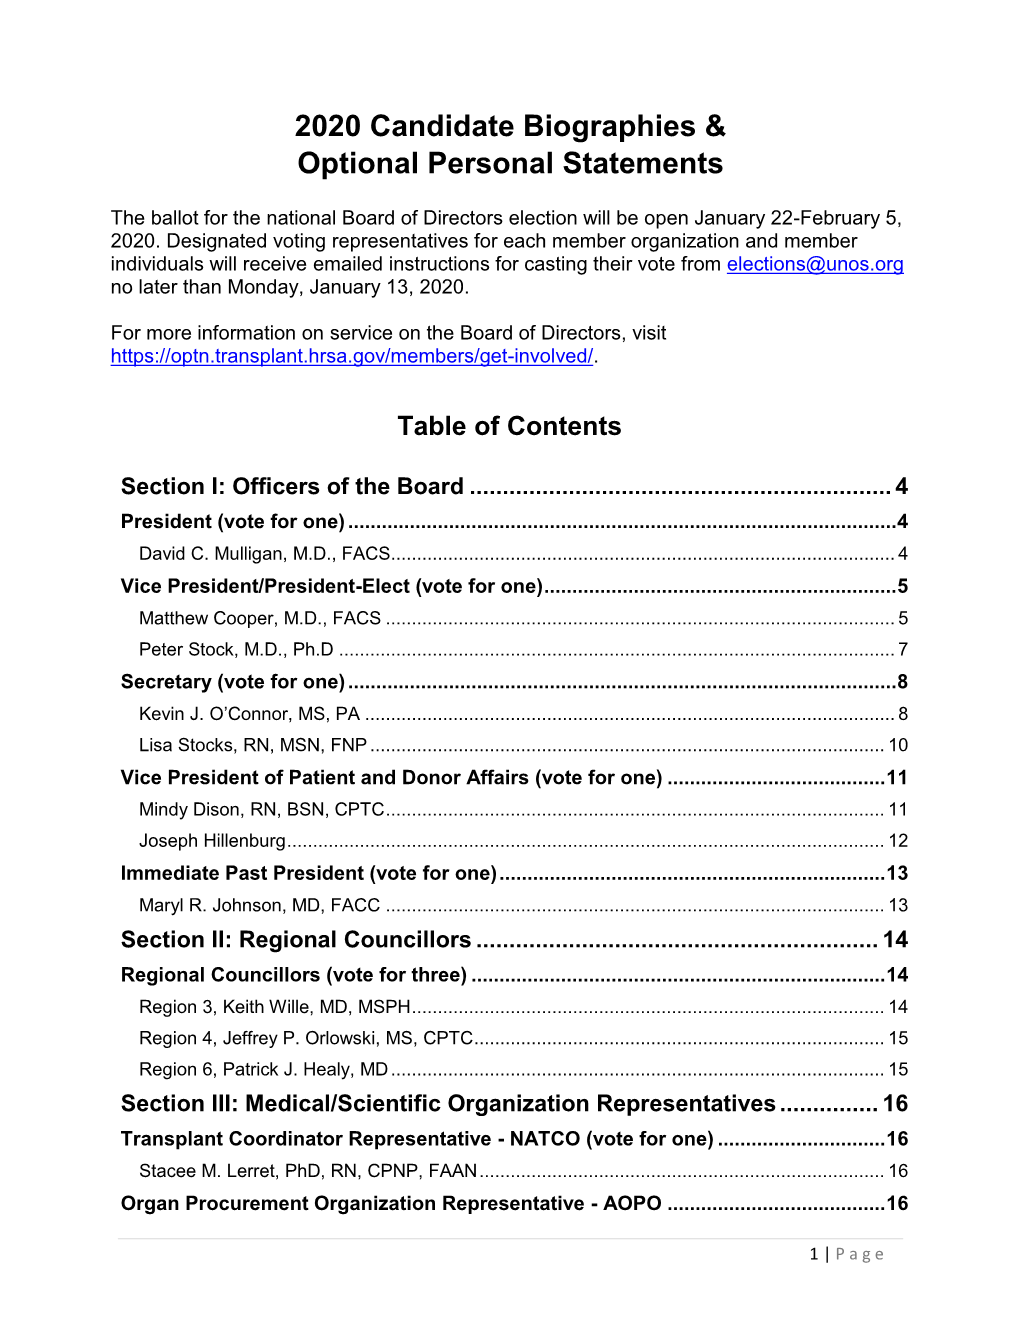 2020 Candidate Biographies & Optional Personal Statements